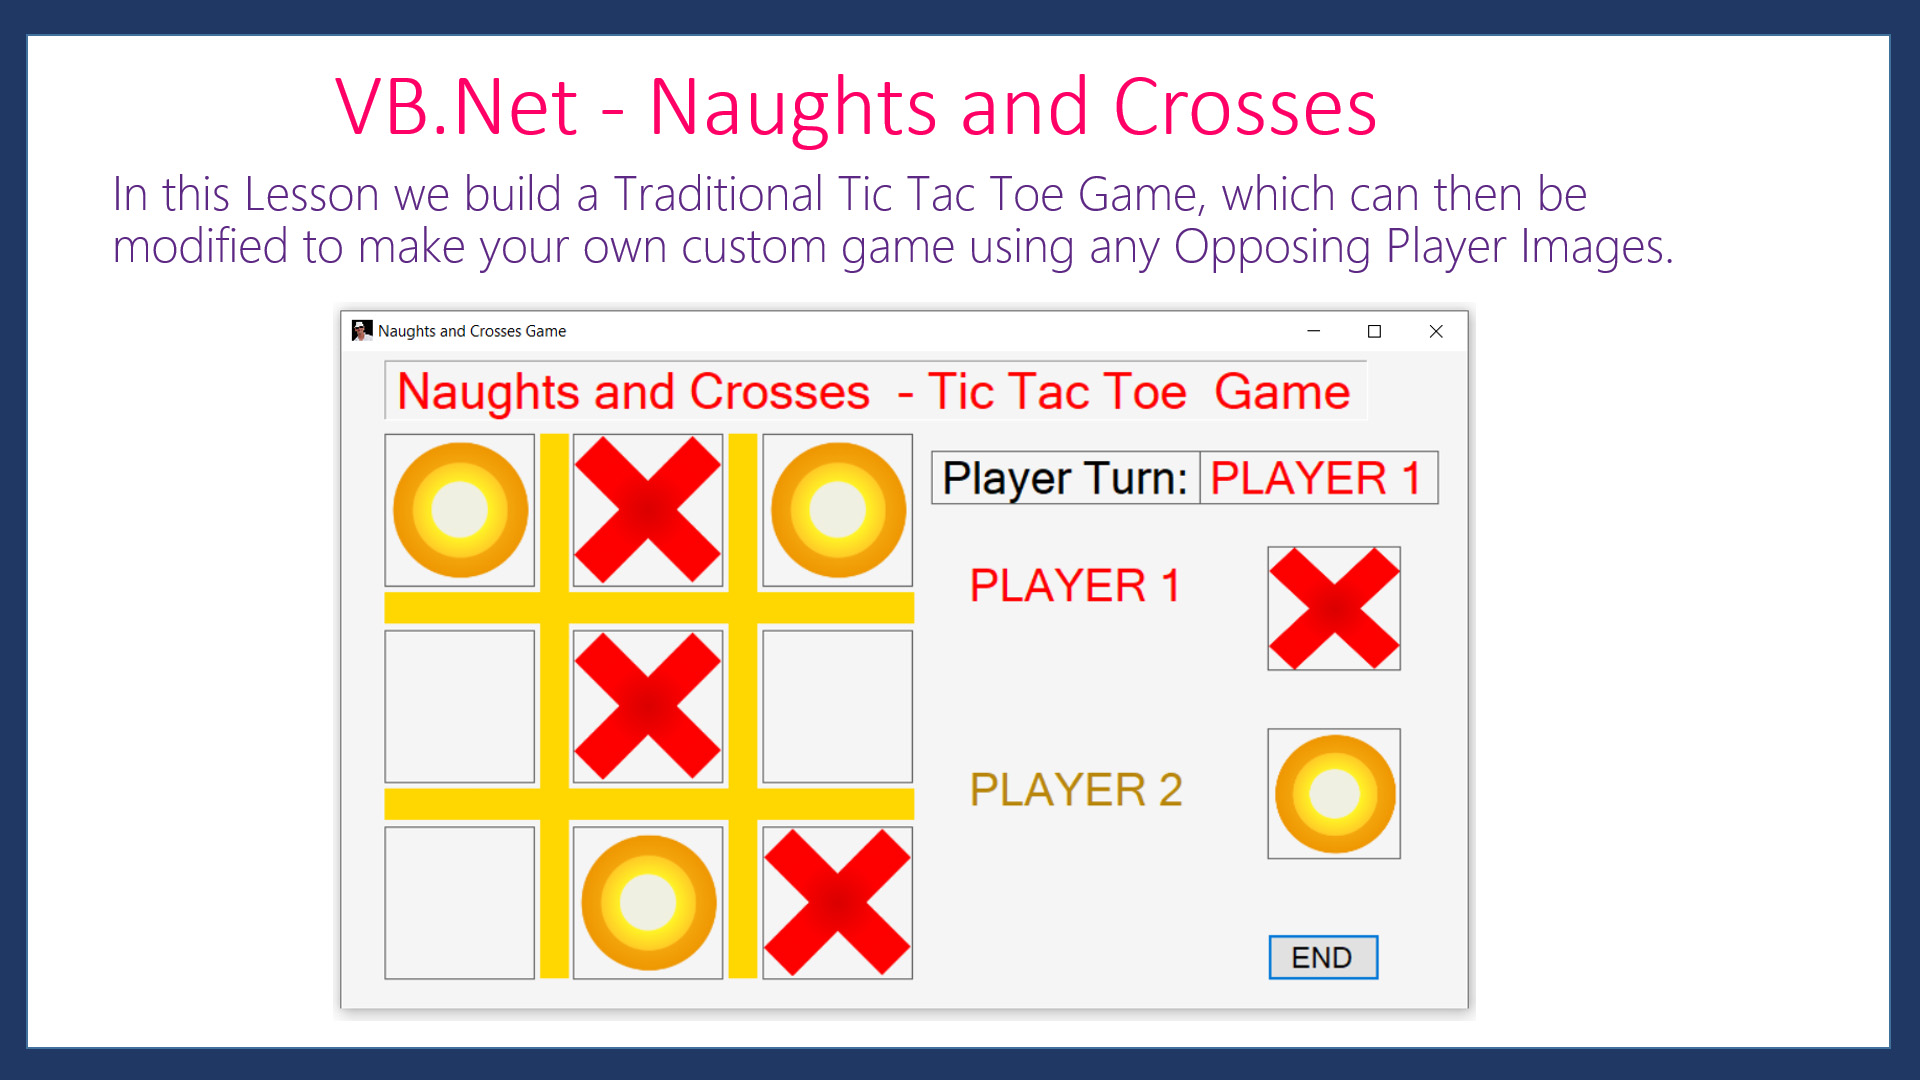 The PE Shed - Tic tac toe / Naughts and Crosses seems to be in